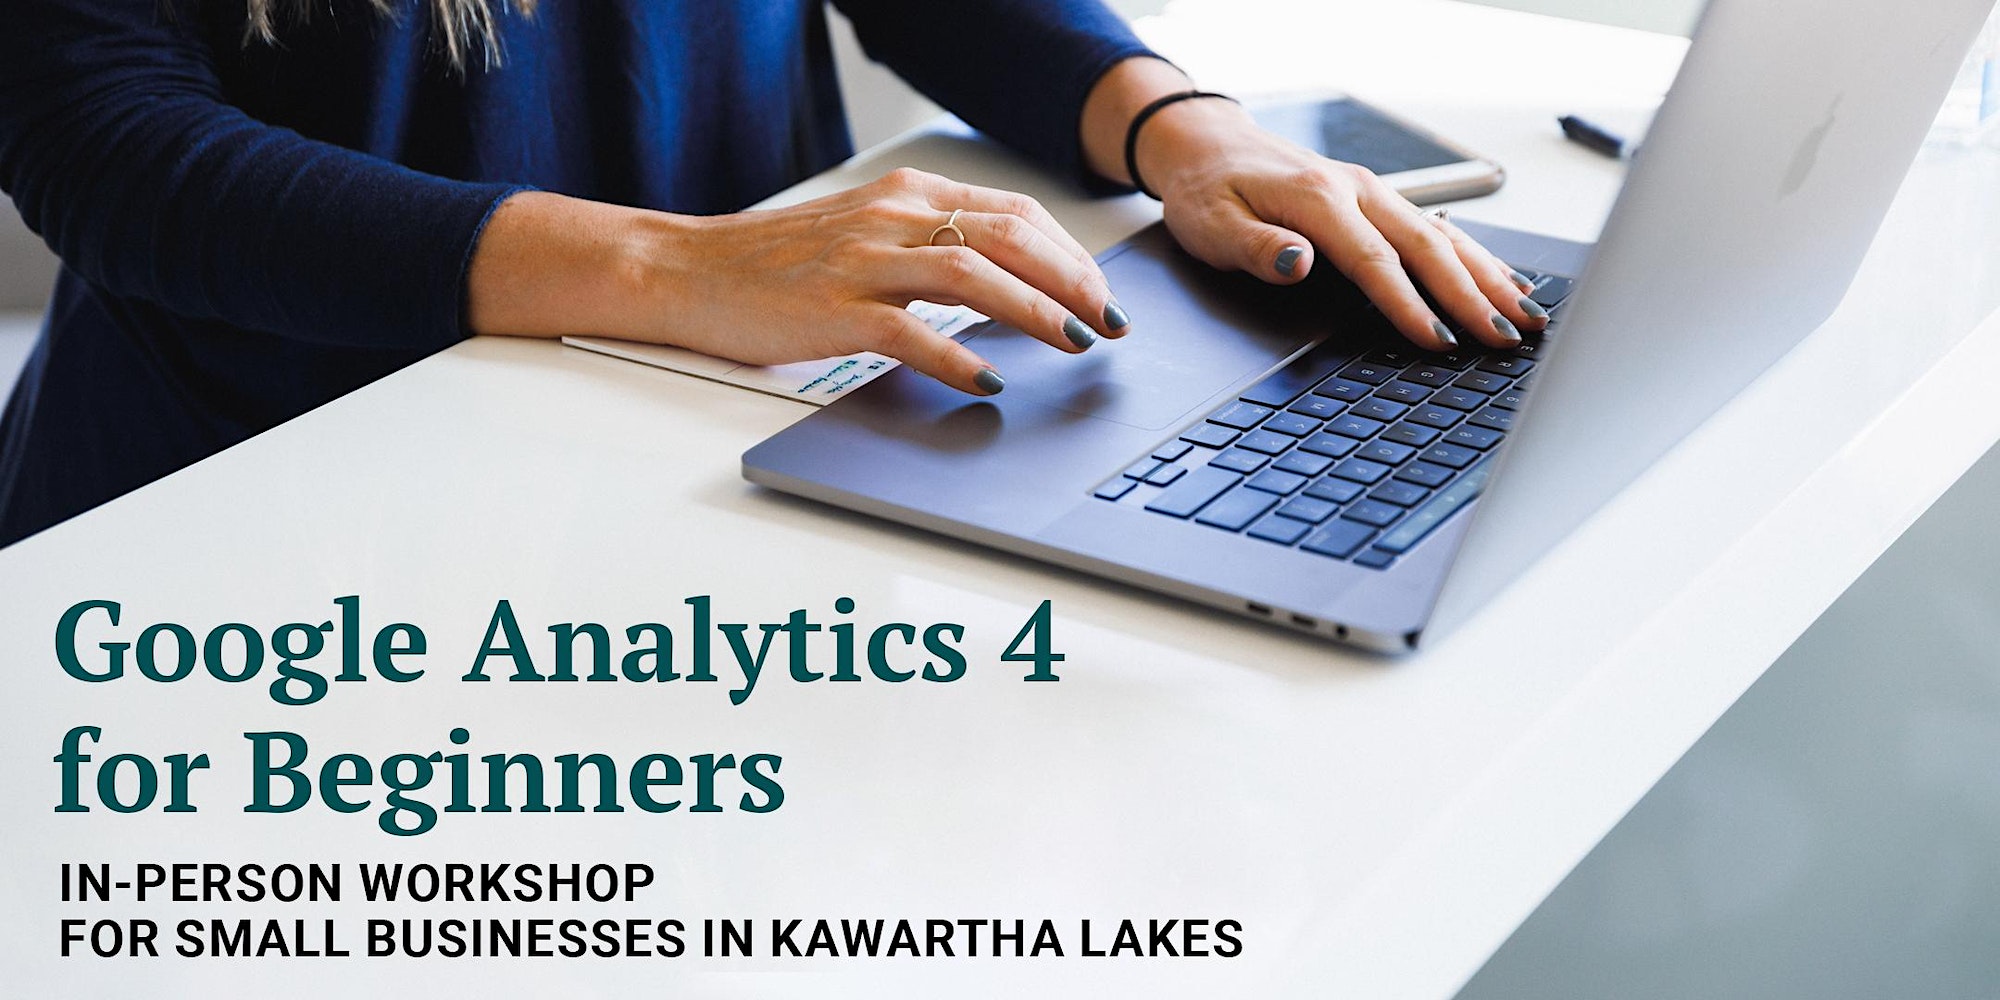 Google Analytics 4 for Beginners: In-person workshop for small businesses in Kawartha Lakes